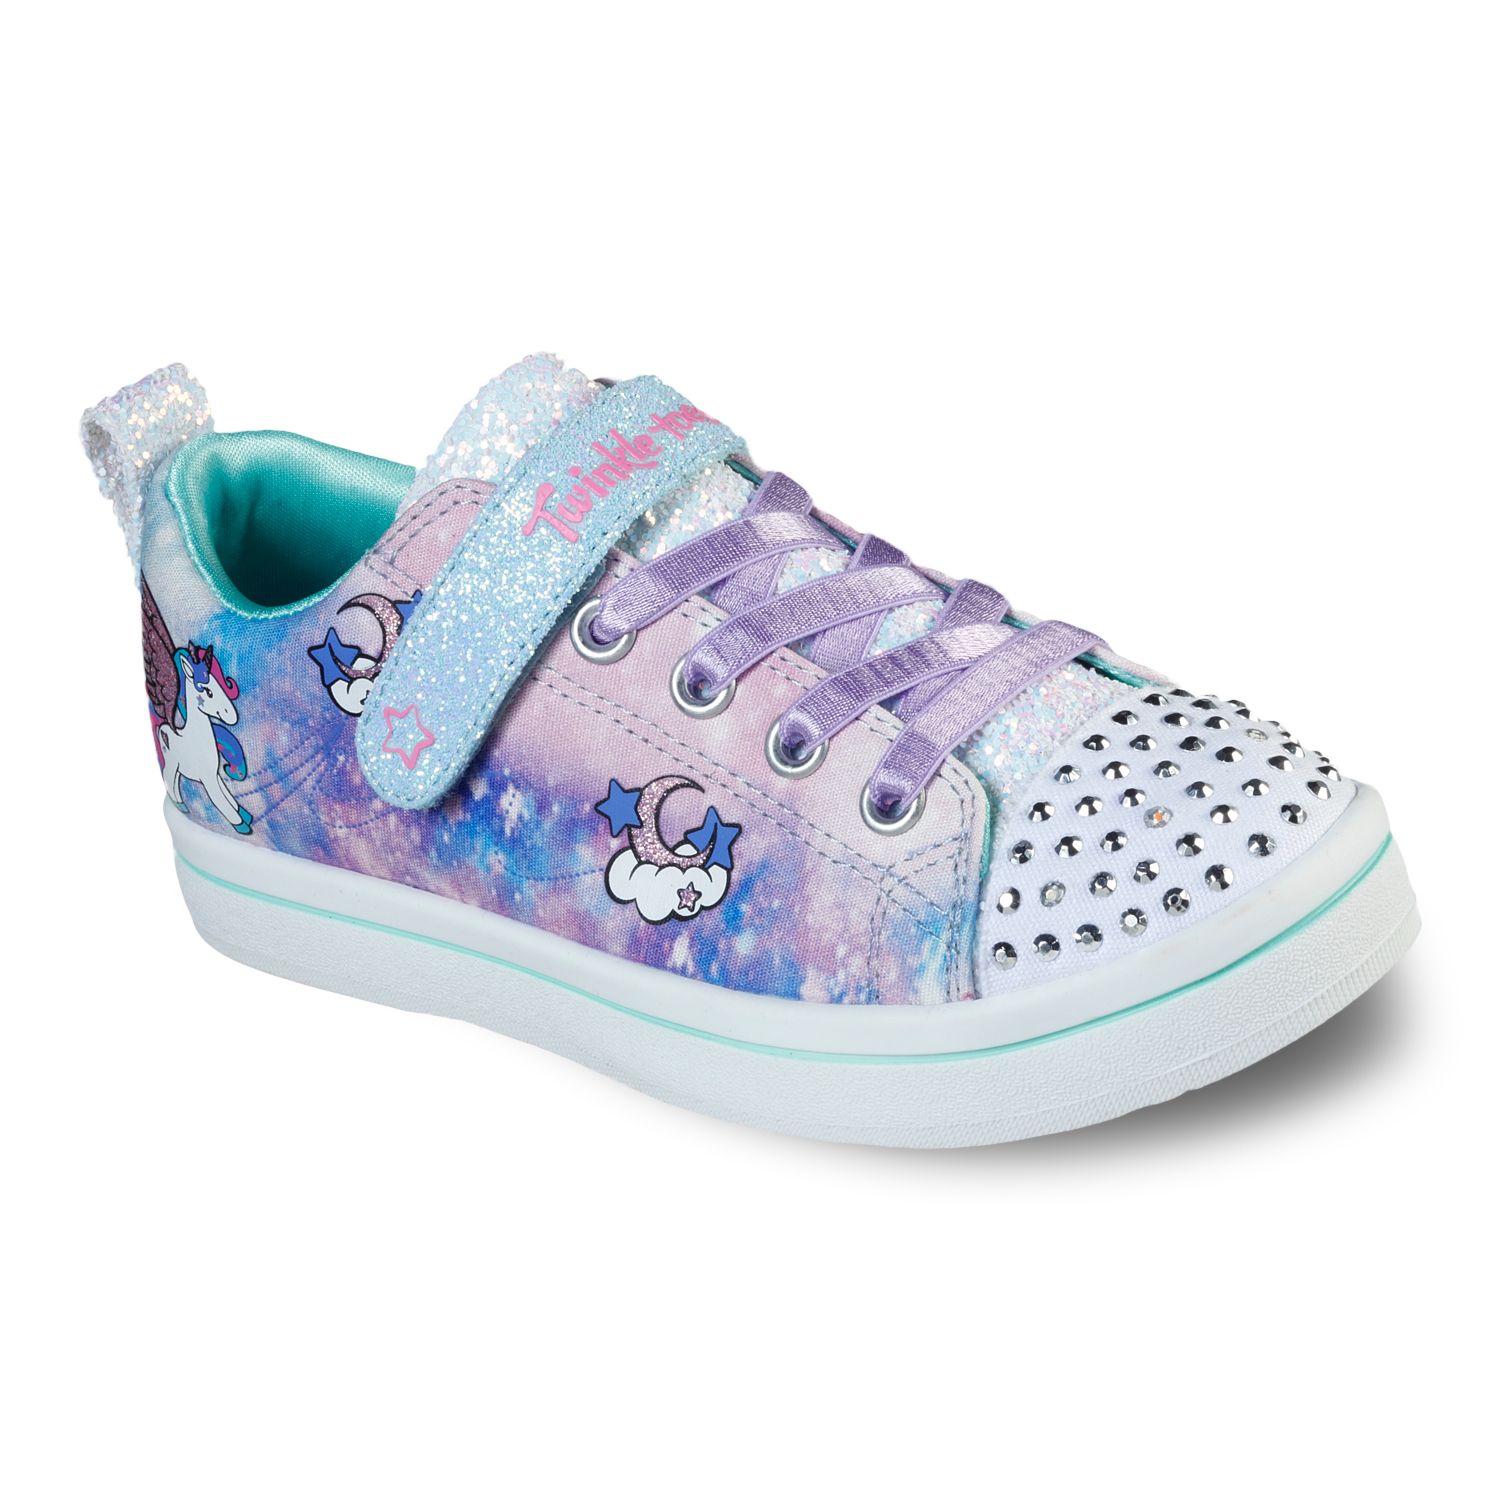 Twinkle Toes Unicorn Girls' Light Up Shoes